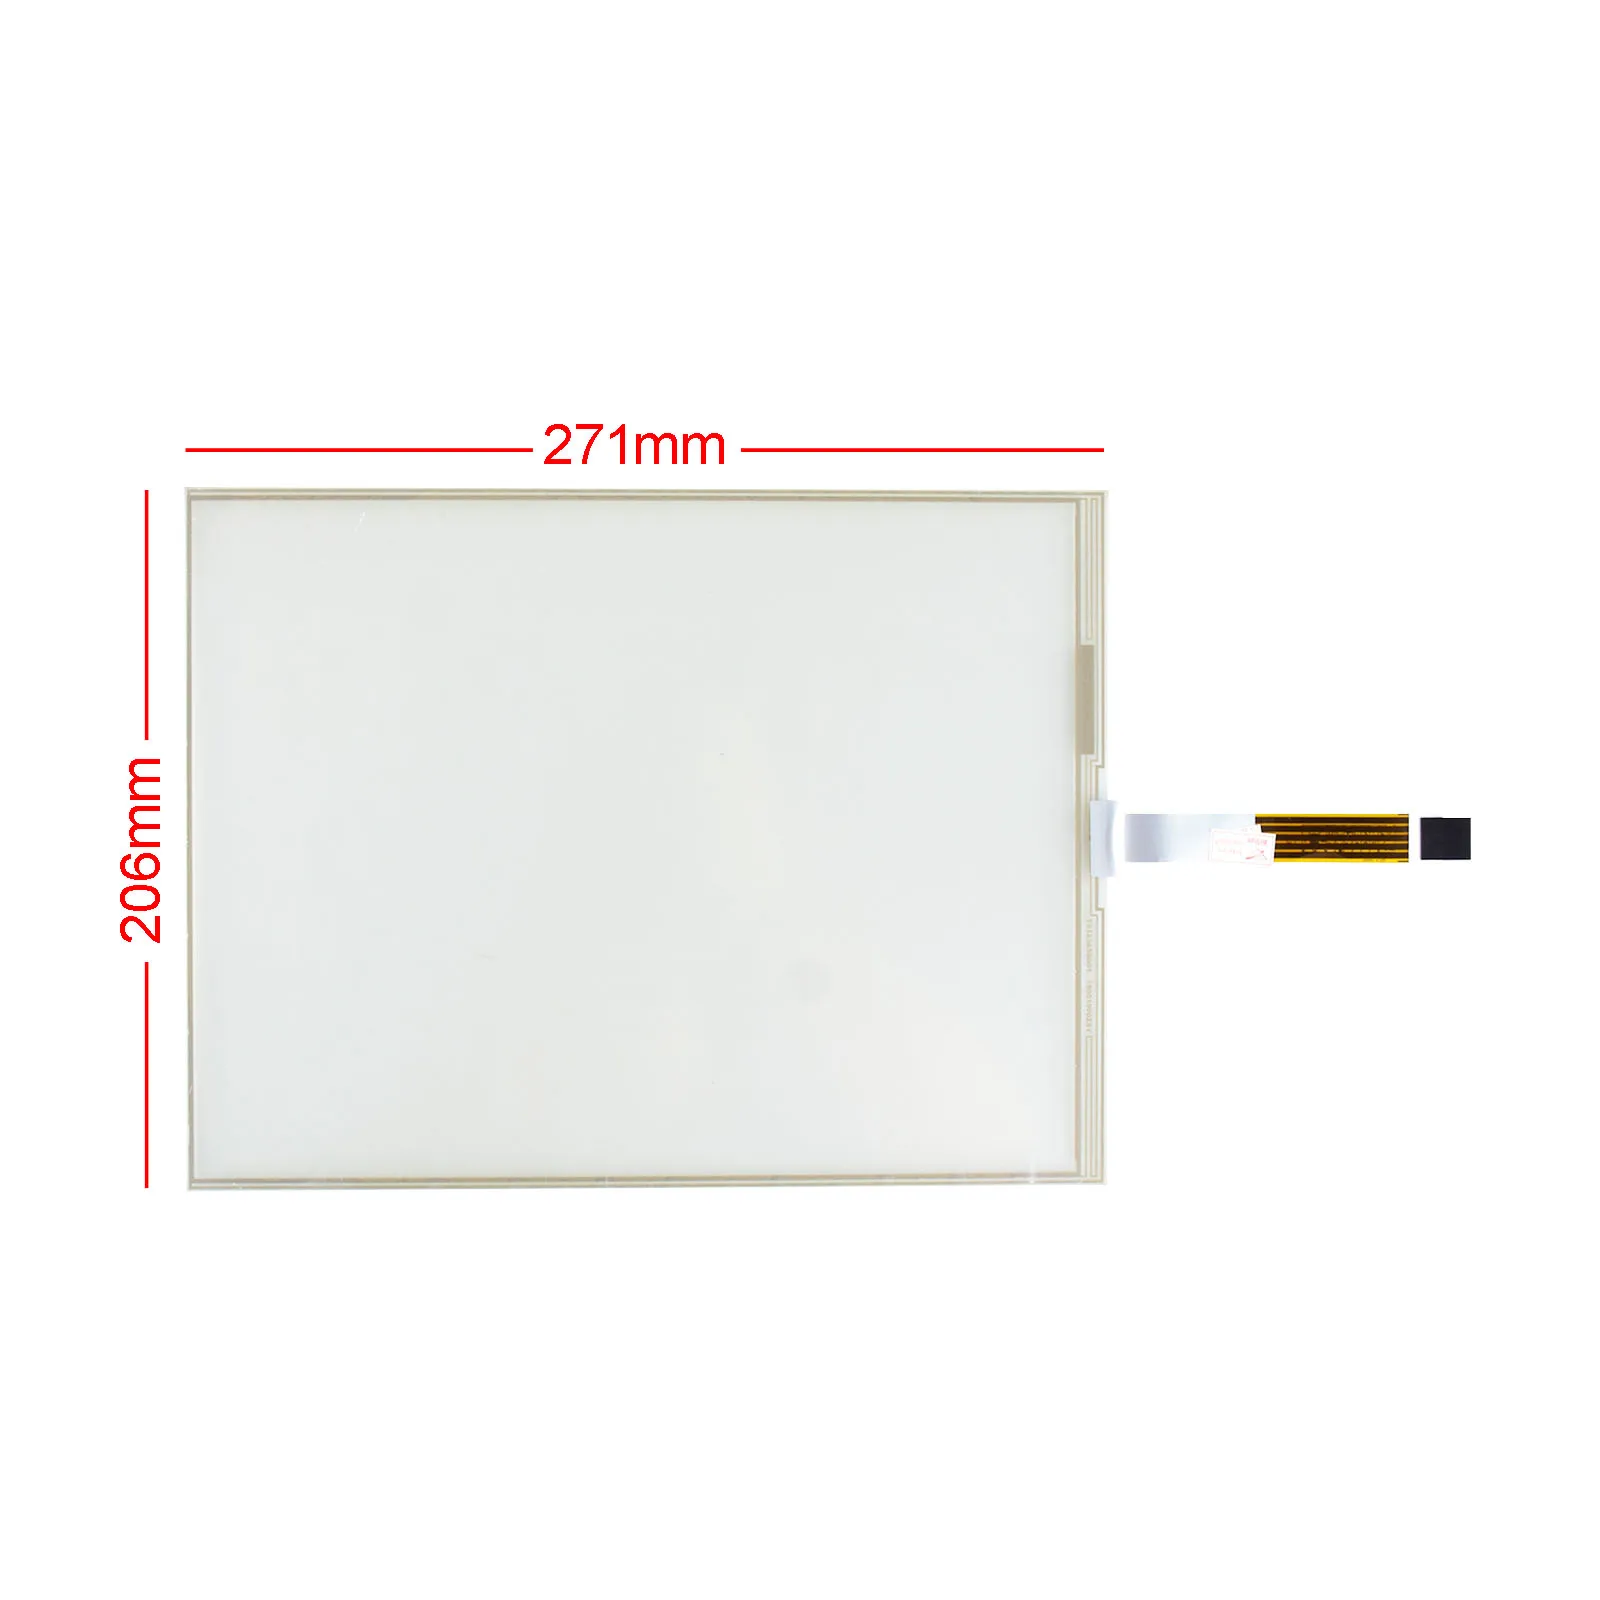 12.1 inch Resistive Touch Screen Glass Panel for Monitor 5 wire 4:3 271*206mm